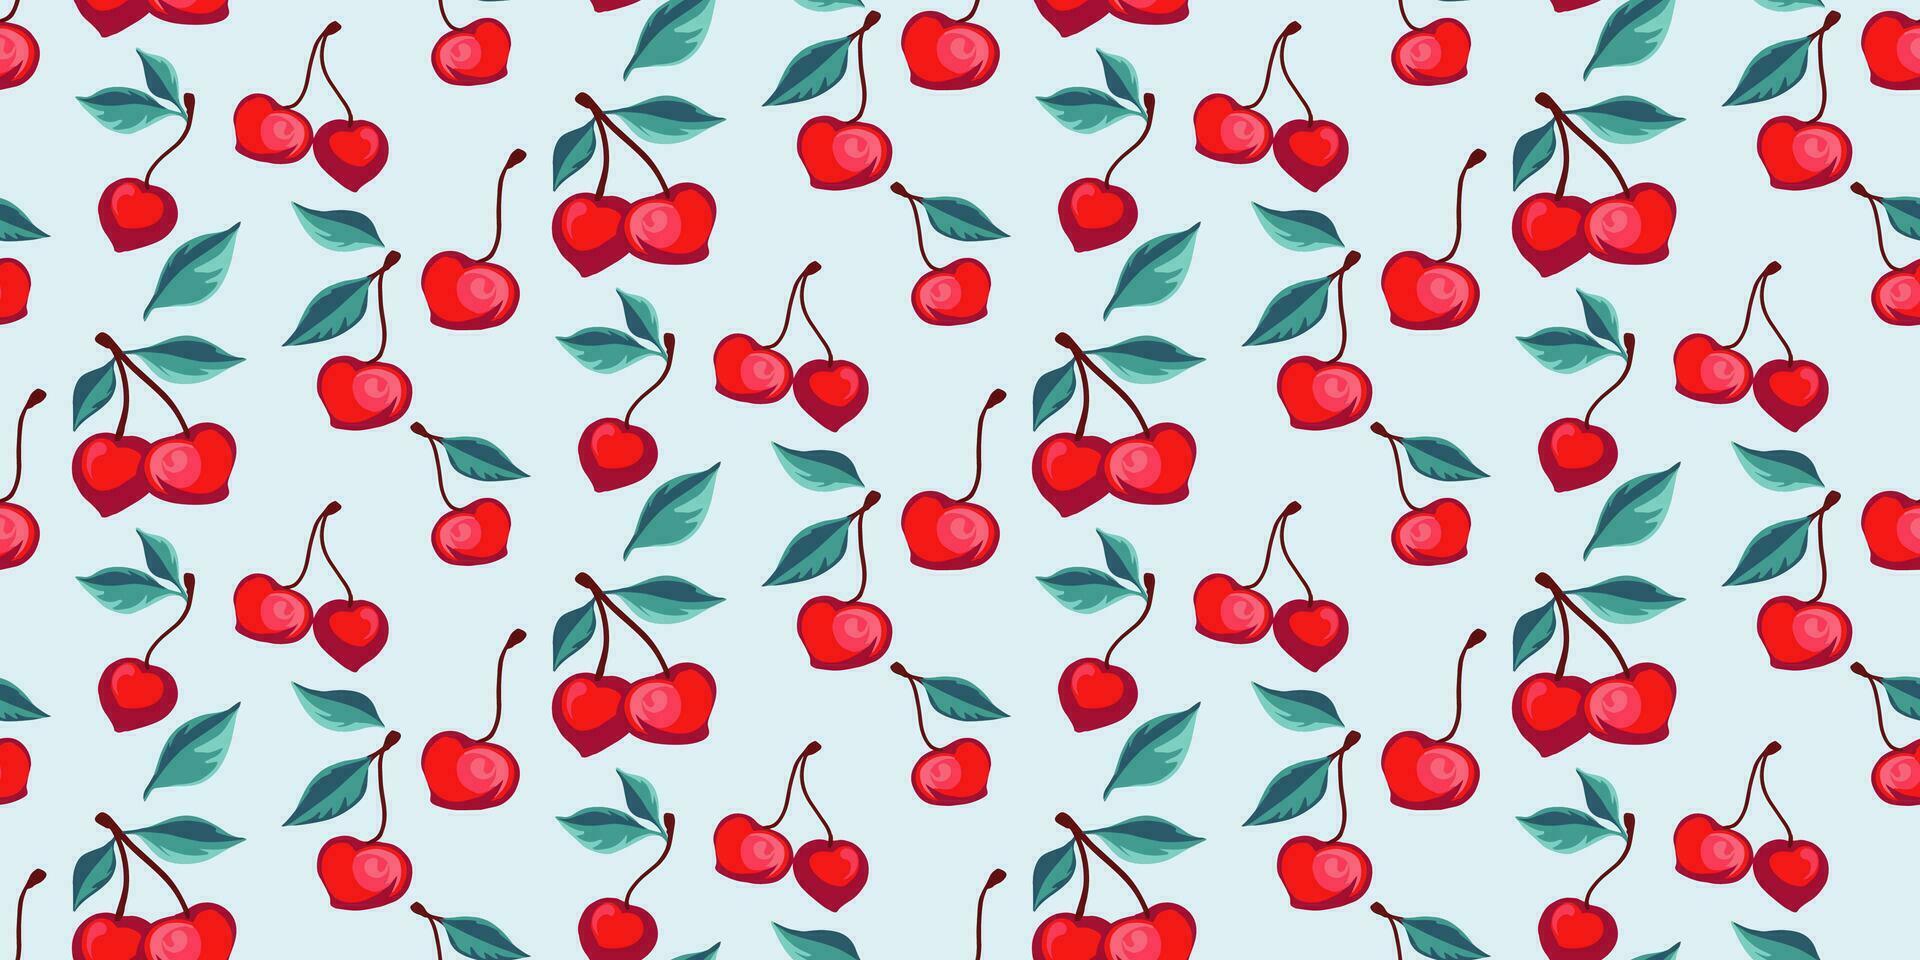 Seamless pattern with red Cherries on a light background. Summer berry, berries, leaves, background. Vector hand drawn sketch cherry.  Design ornament for paper, cover, fabric, fashion, textile